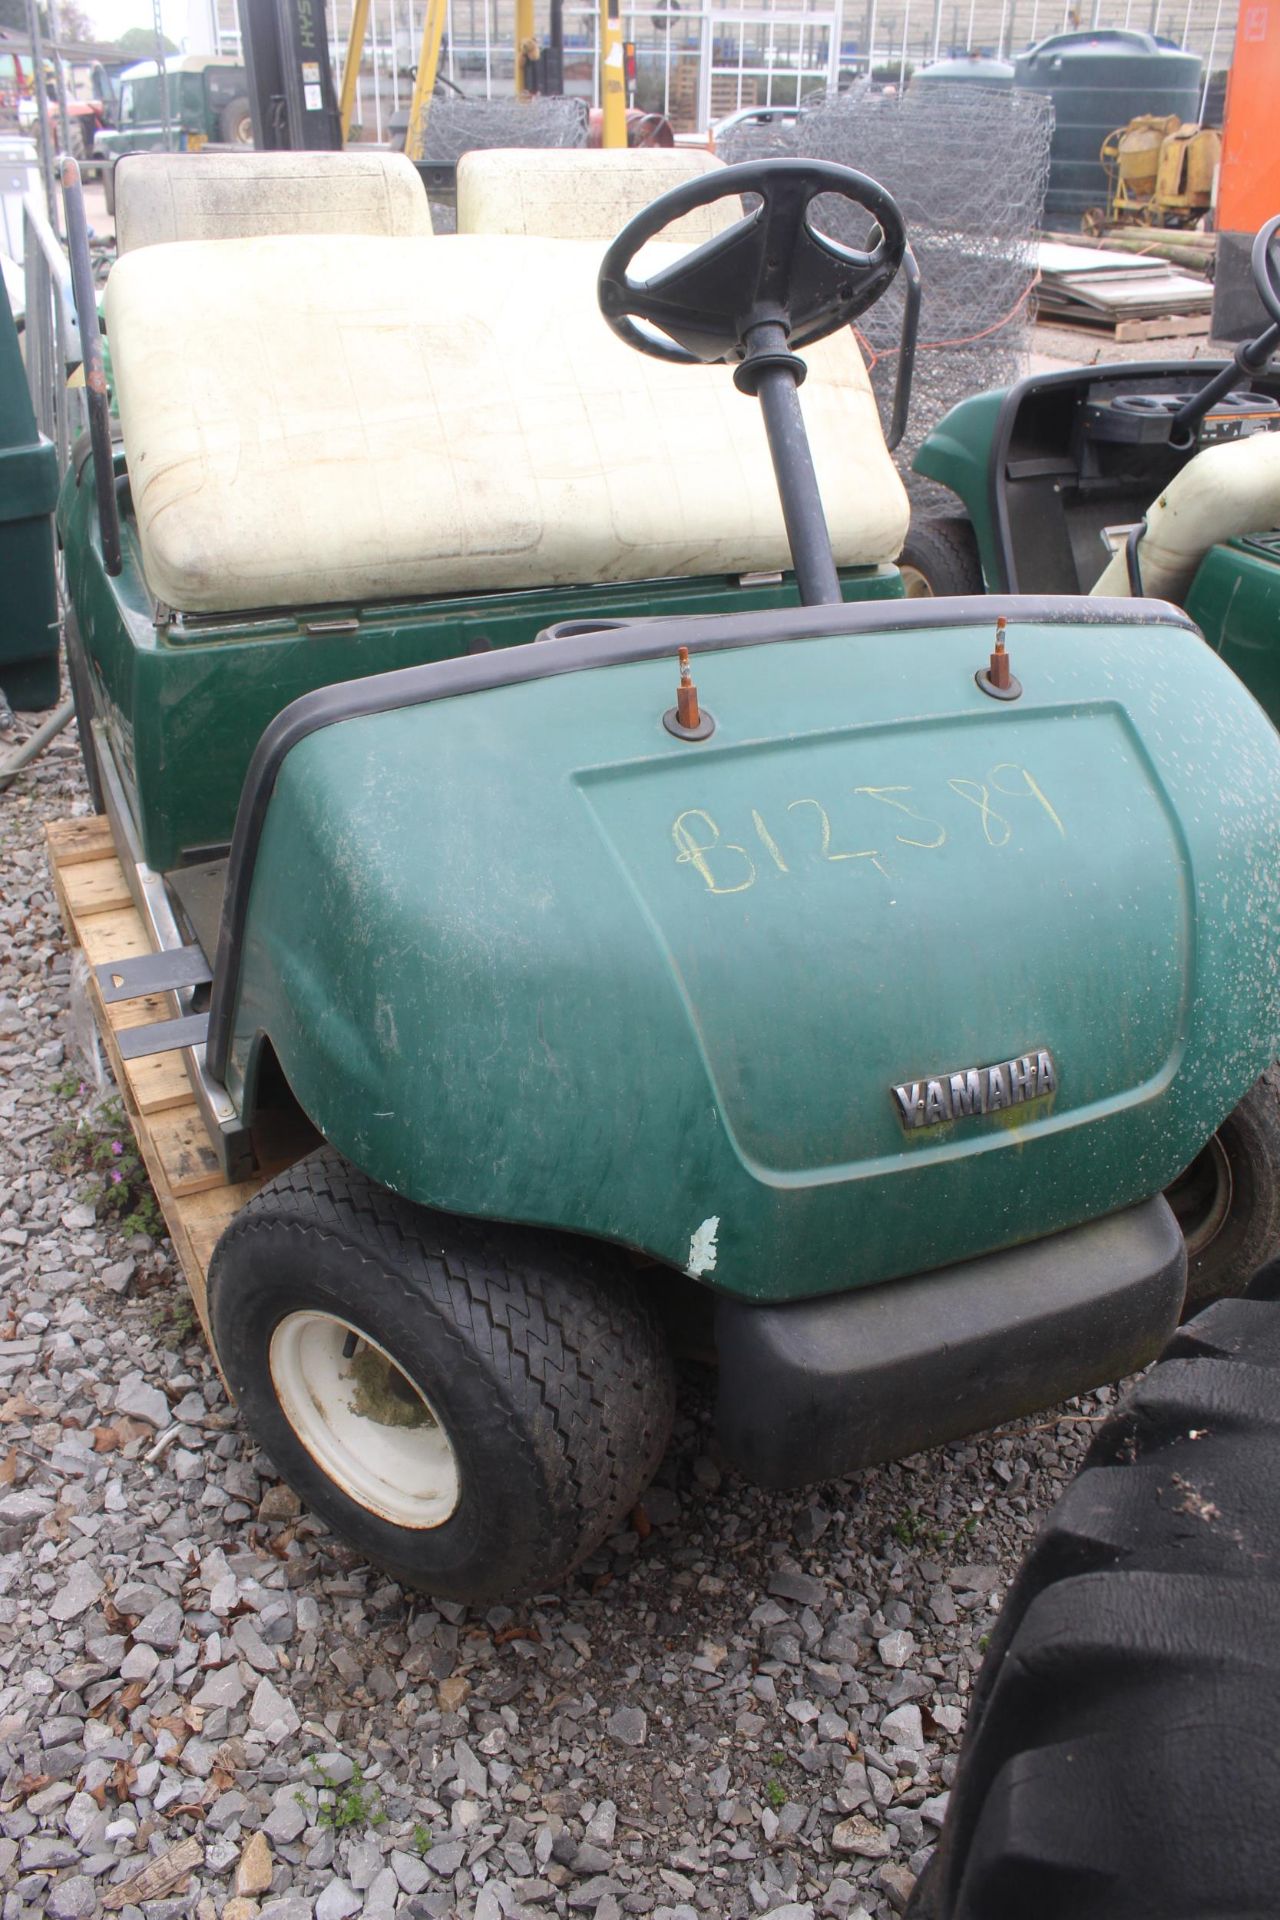 GOLF BUGGY YAMAHA FOR SPARES NO VAT - Image 2 of 3